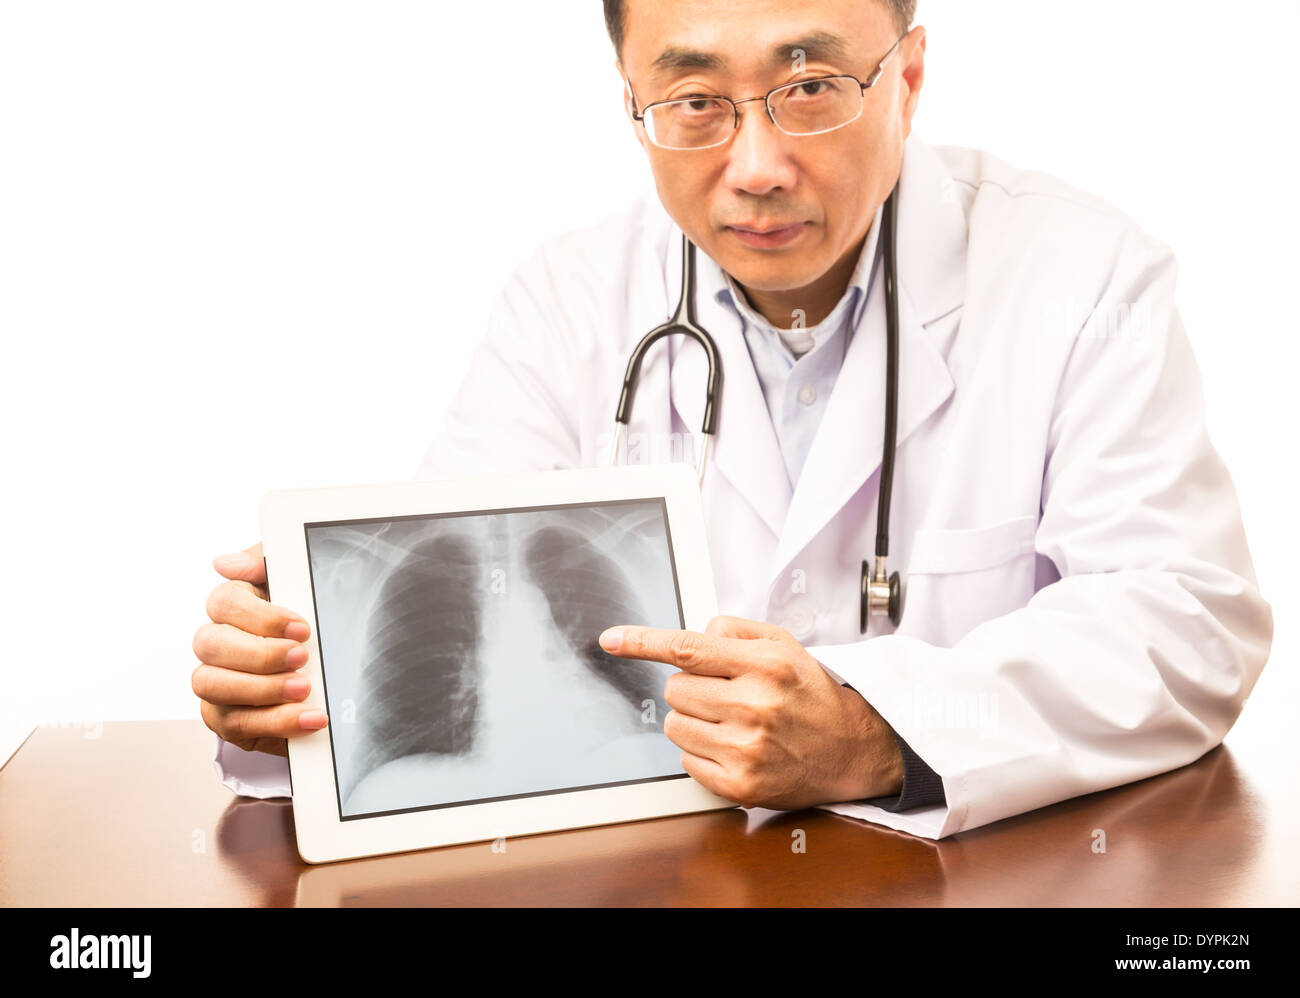 Asian doctor holding a tablet with an x-ray image Stock Photo